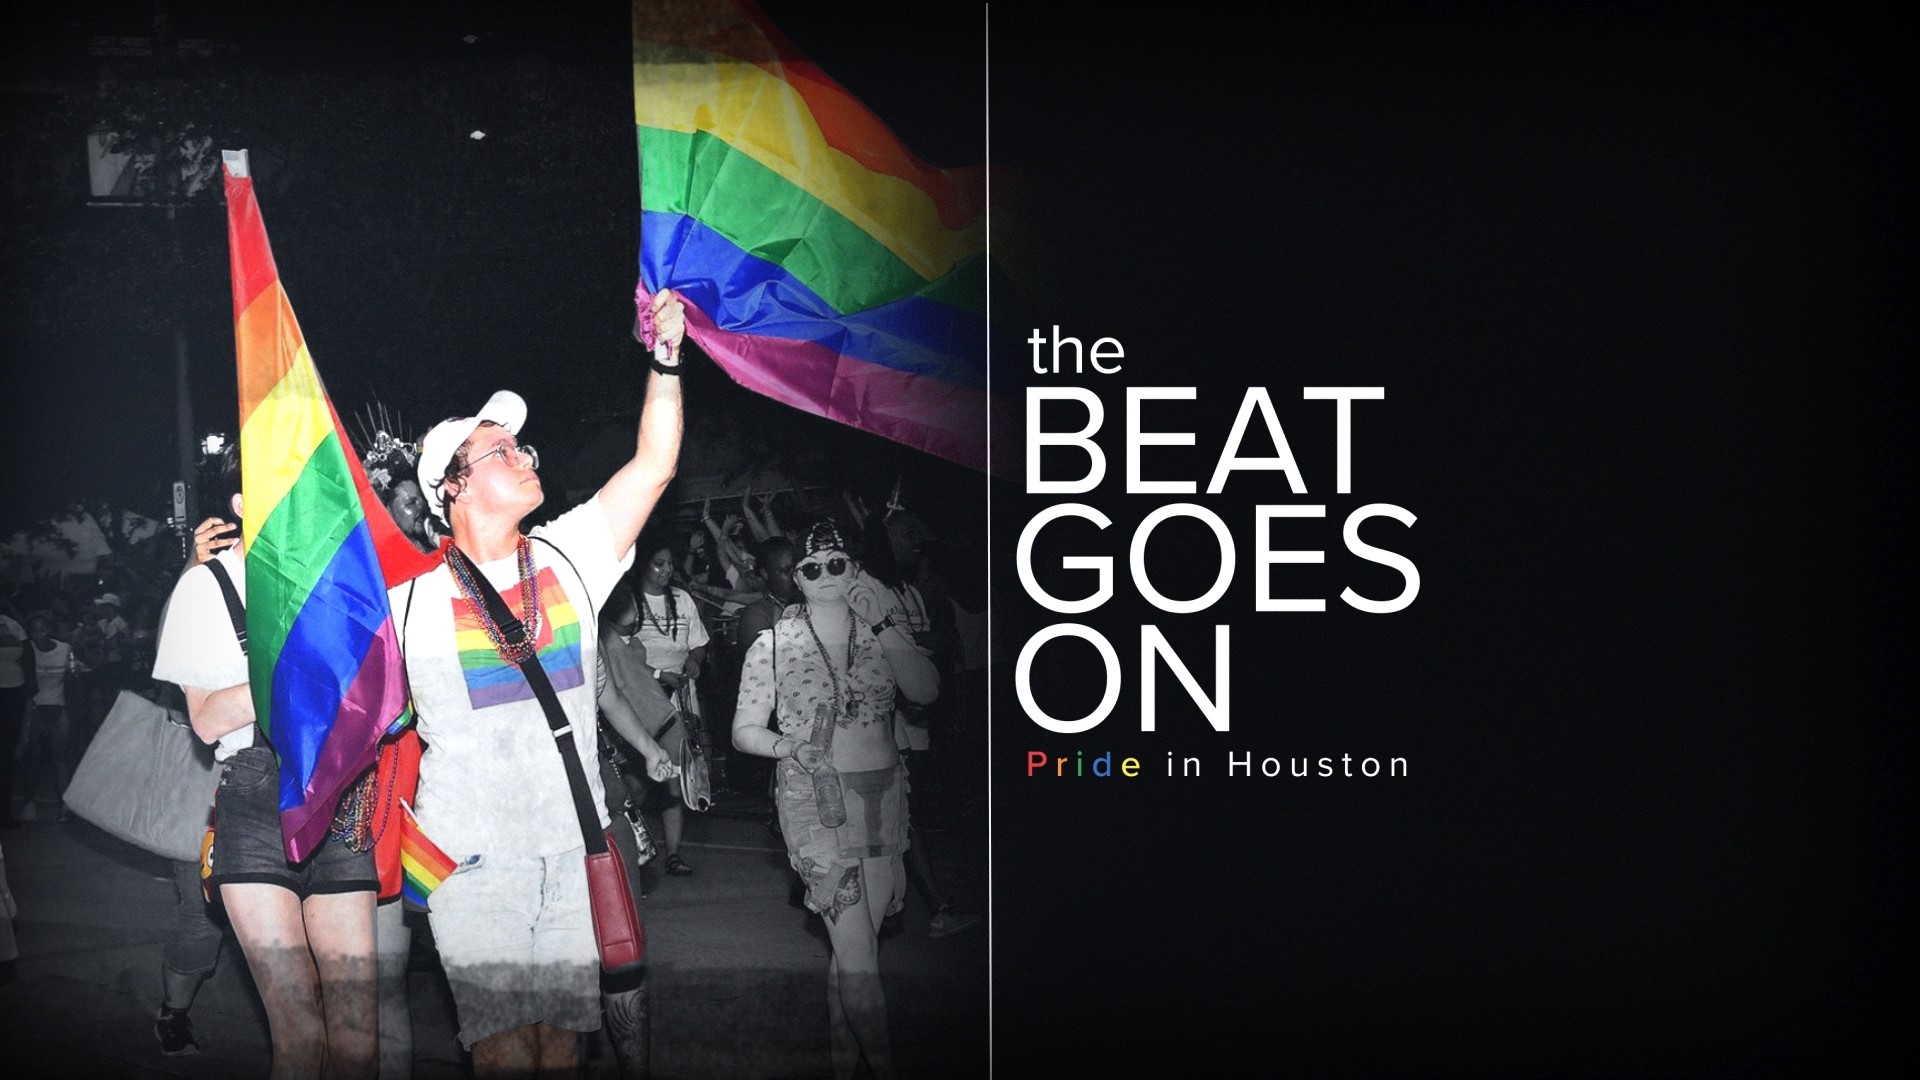 Learn the unstoppable story of Houston's LGBTQ+ community from those key in organizing the annual Pride celebration and parade. Watch on KHOU 11+ June 30.